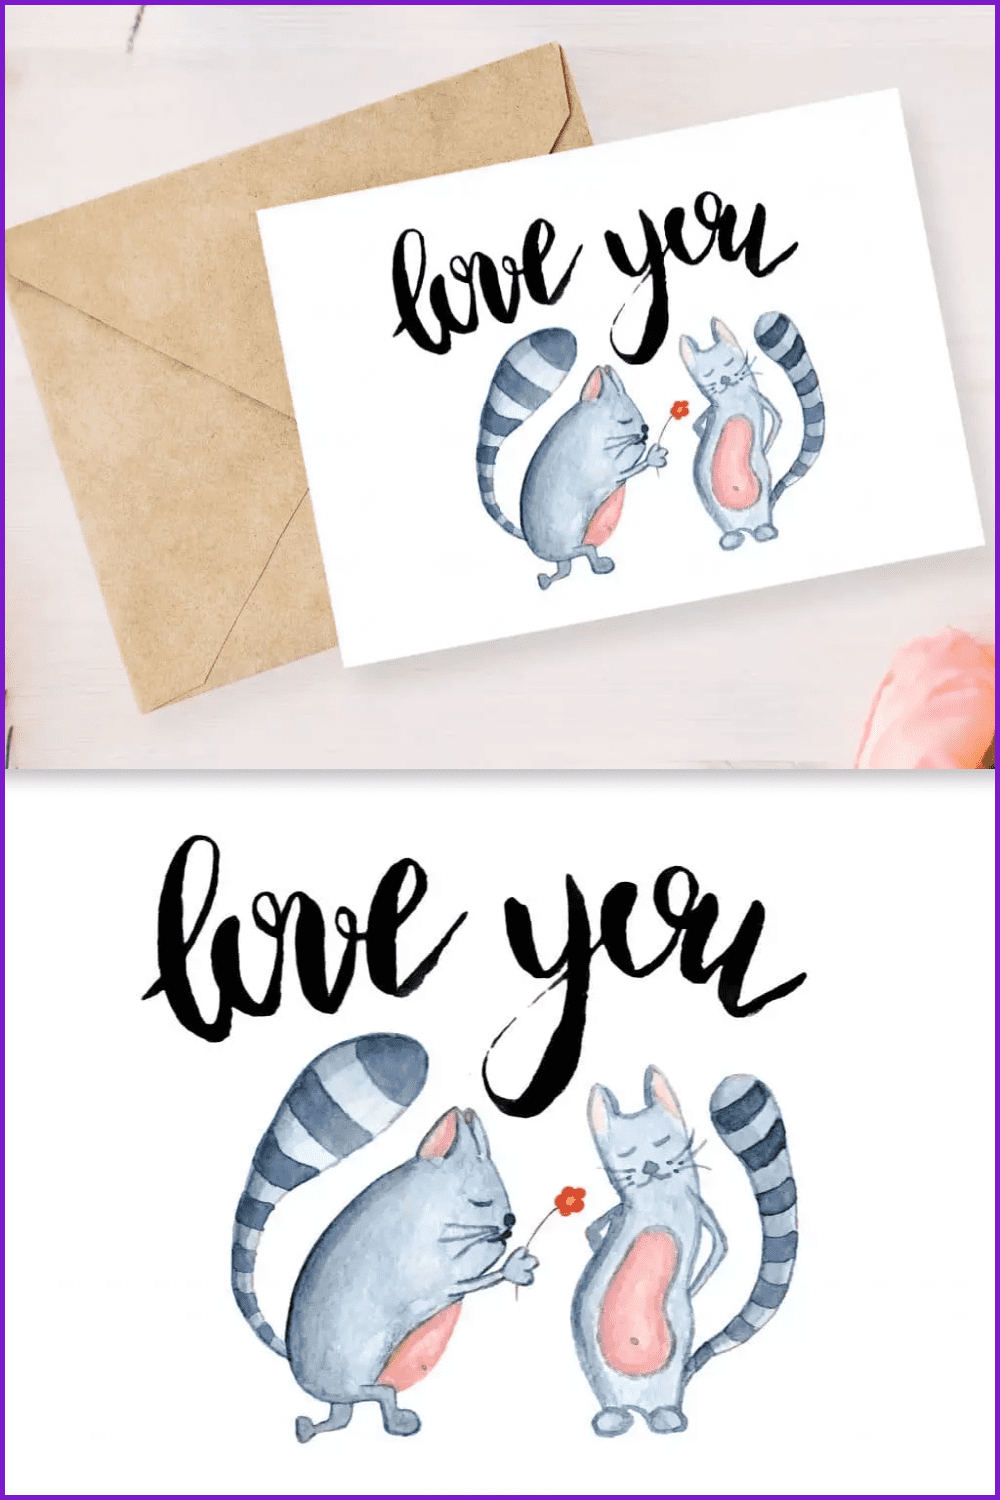 Postcards with painted gray tabby cats and an inscription Love you.